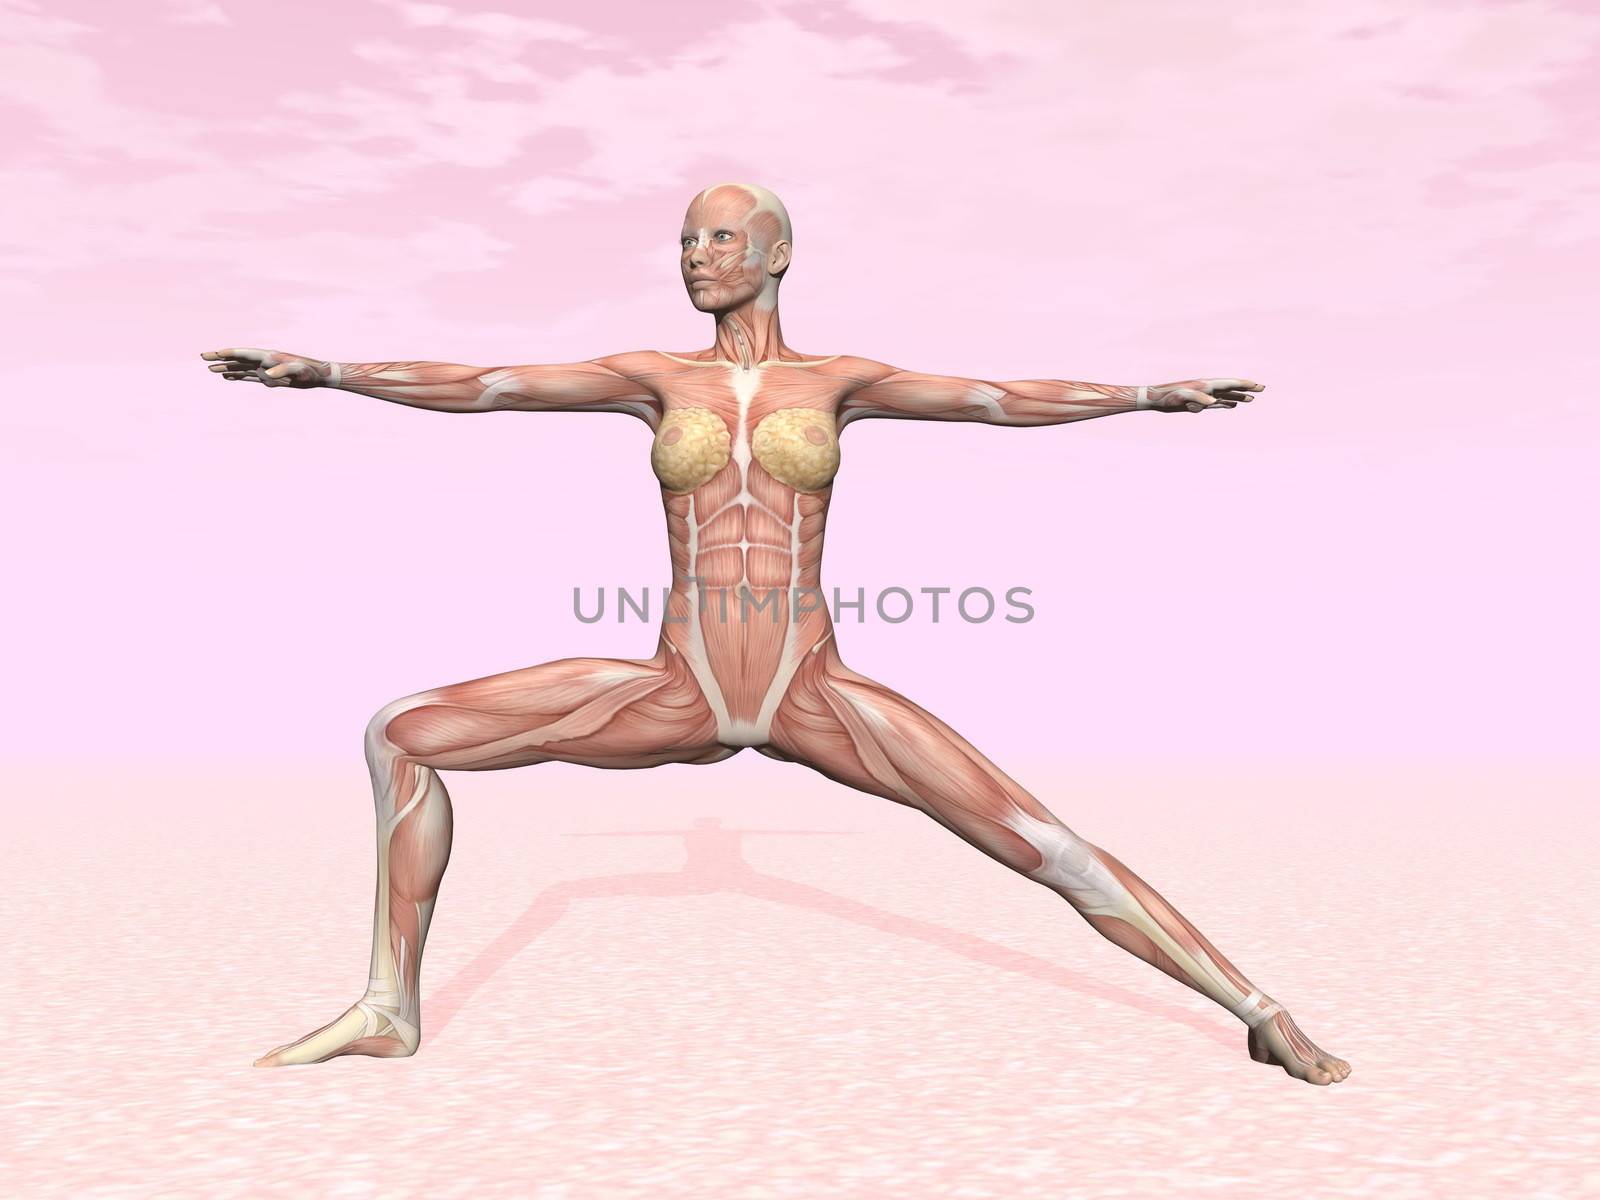 Warrior yoga pose for woman with muscle visible in pink background